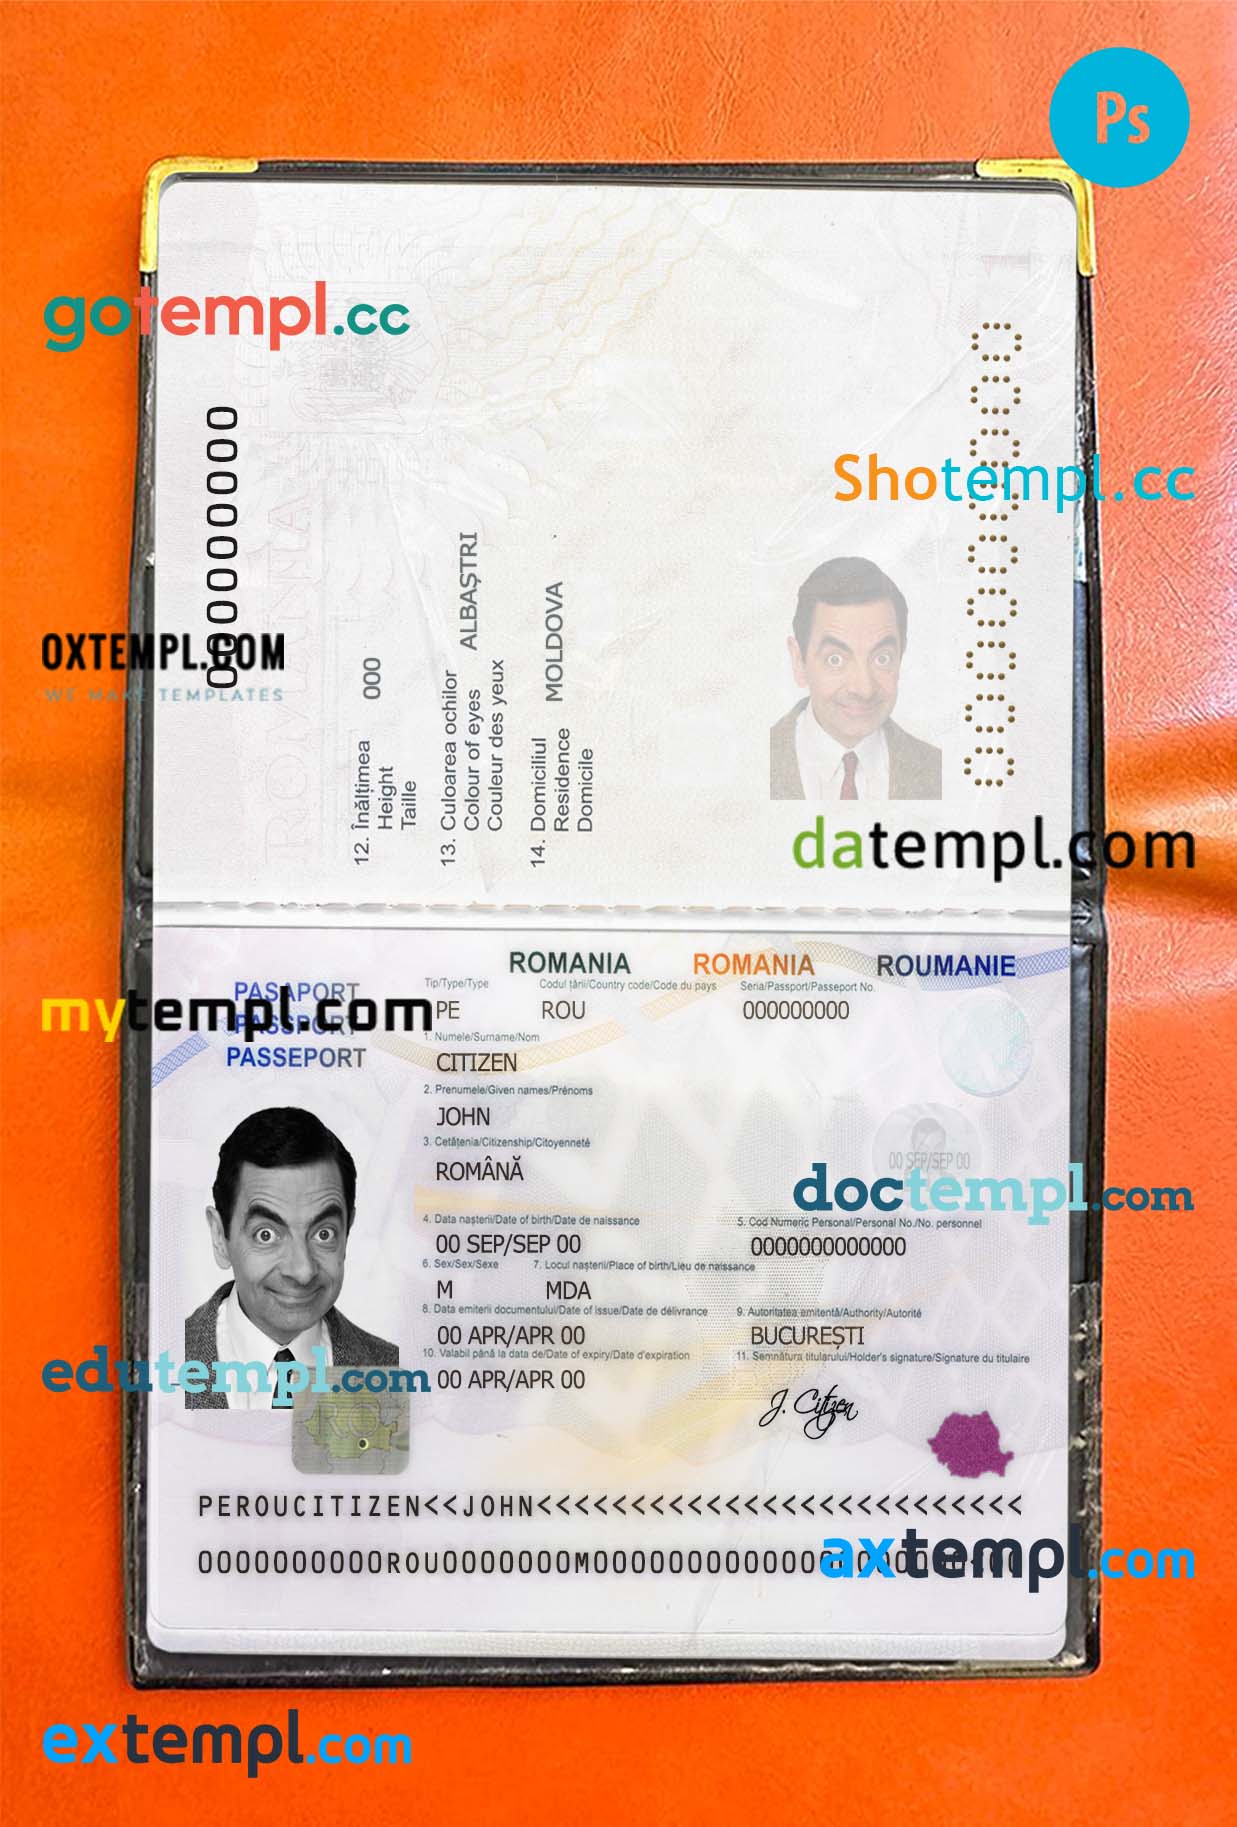 Romania passport psd files, editable scan and snapshot sample, 2 in 1